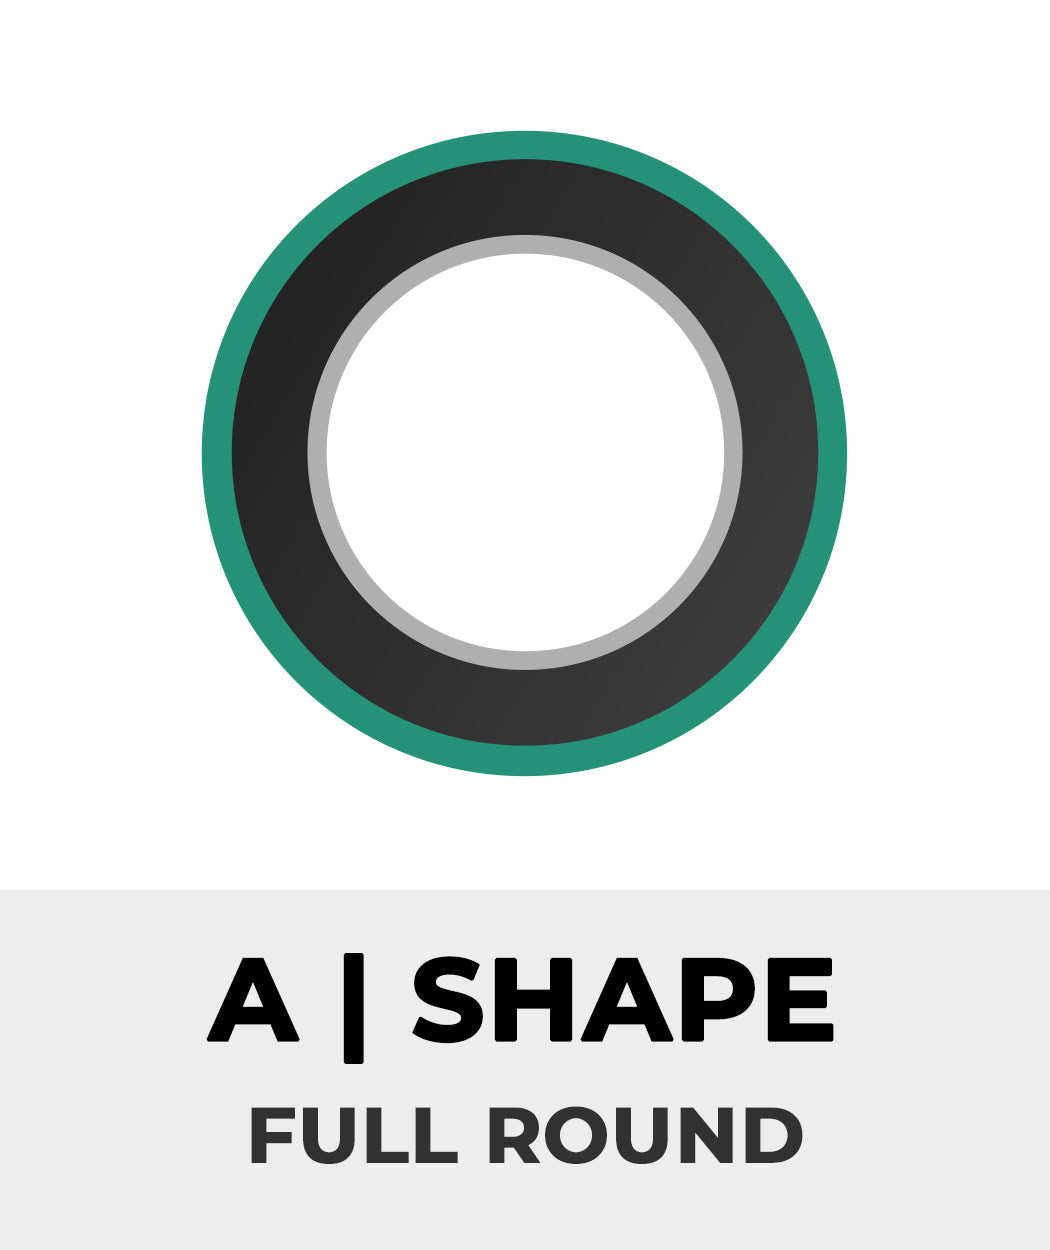 Plan Shape A - Full Round